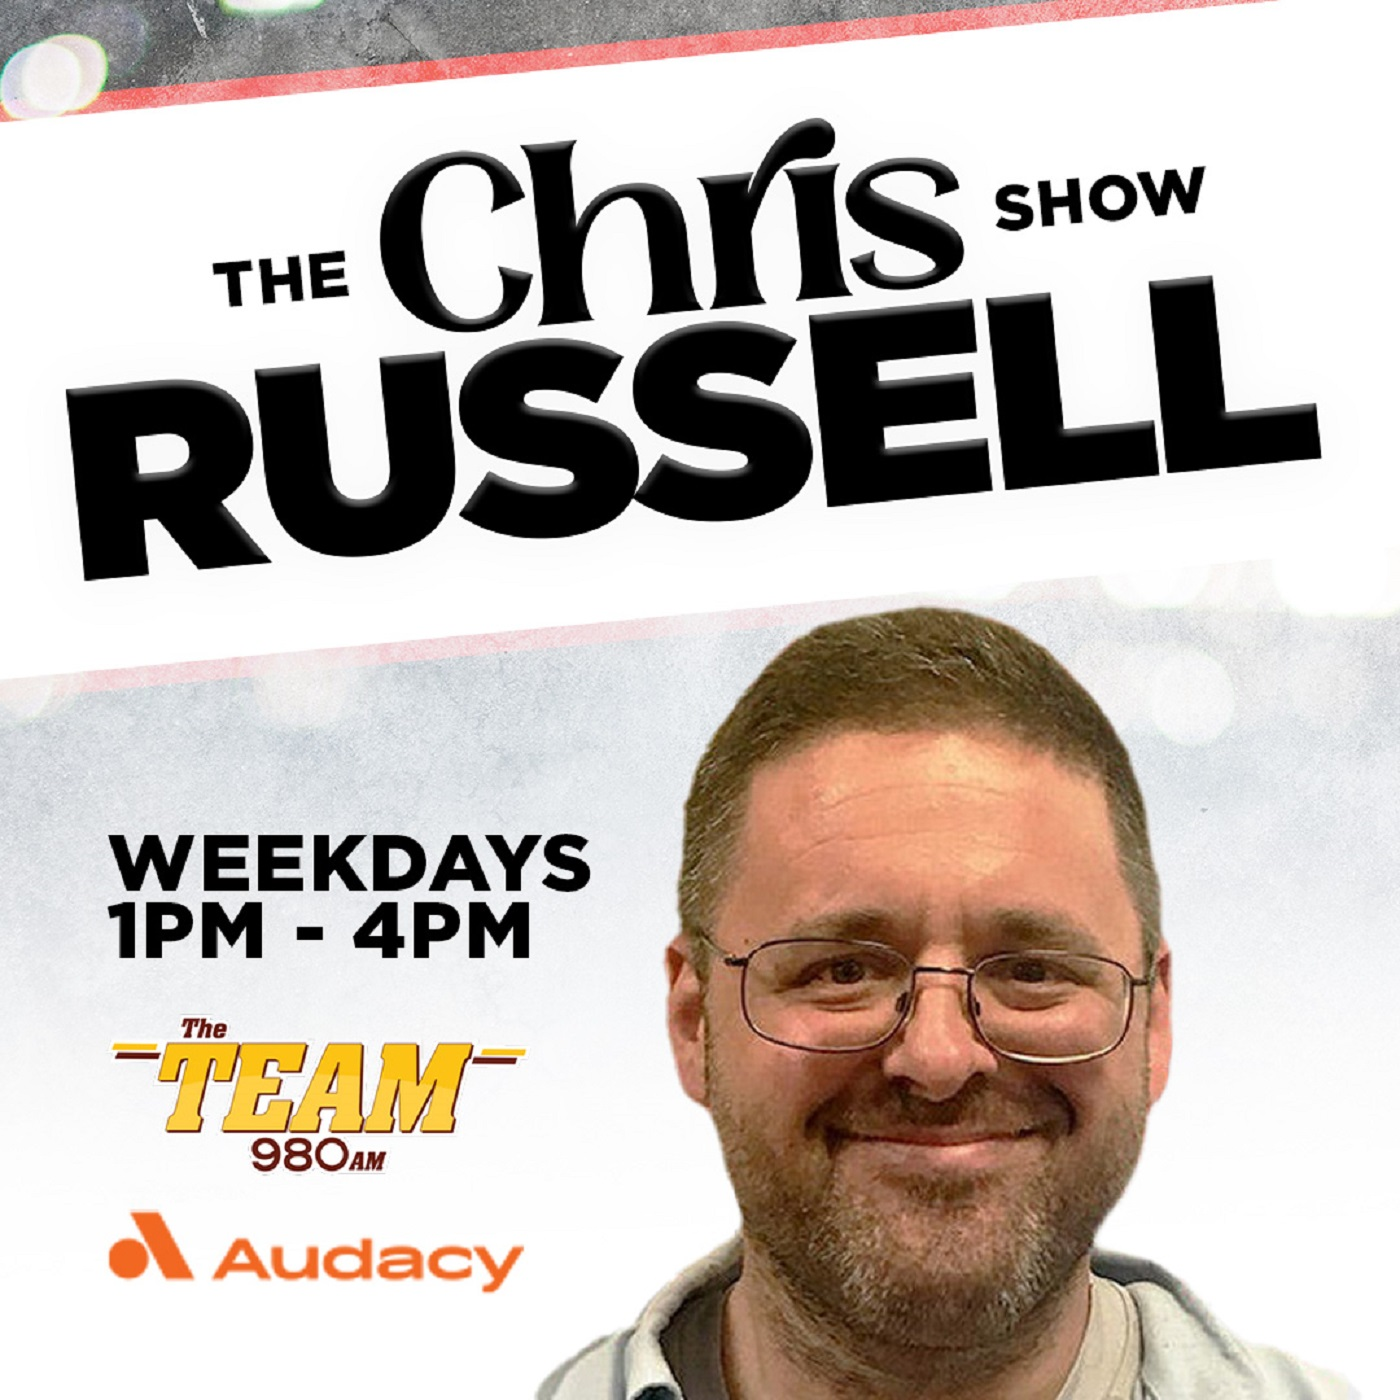 Randy Mueller joins the show